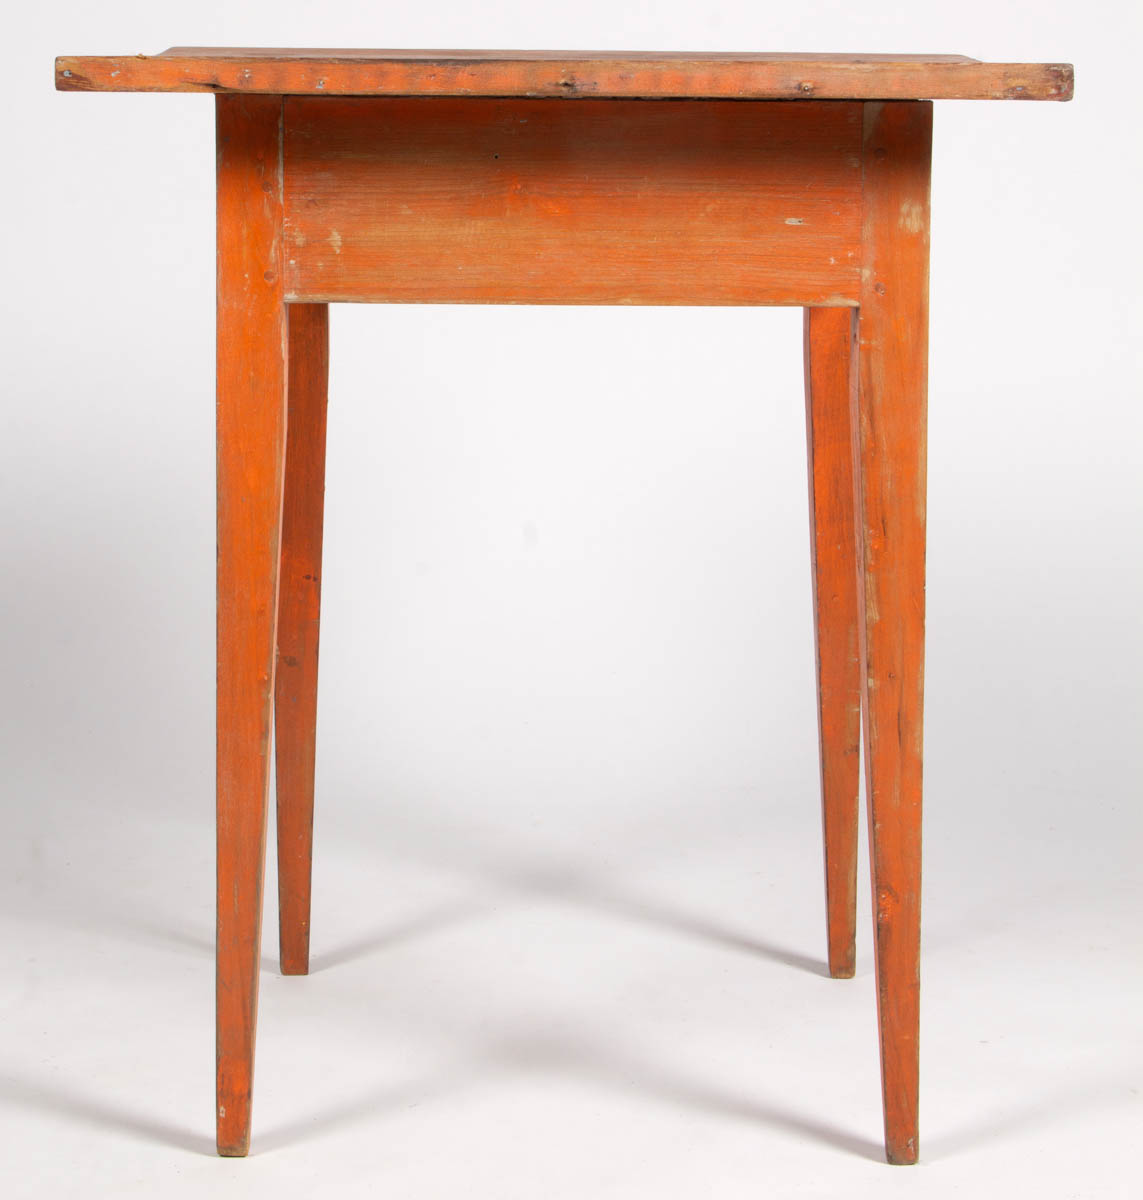 AMERICAN PAINTED PINE STAND TABLE